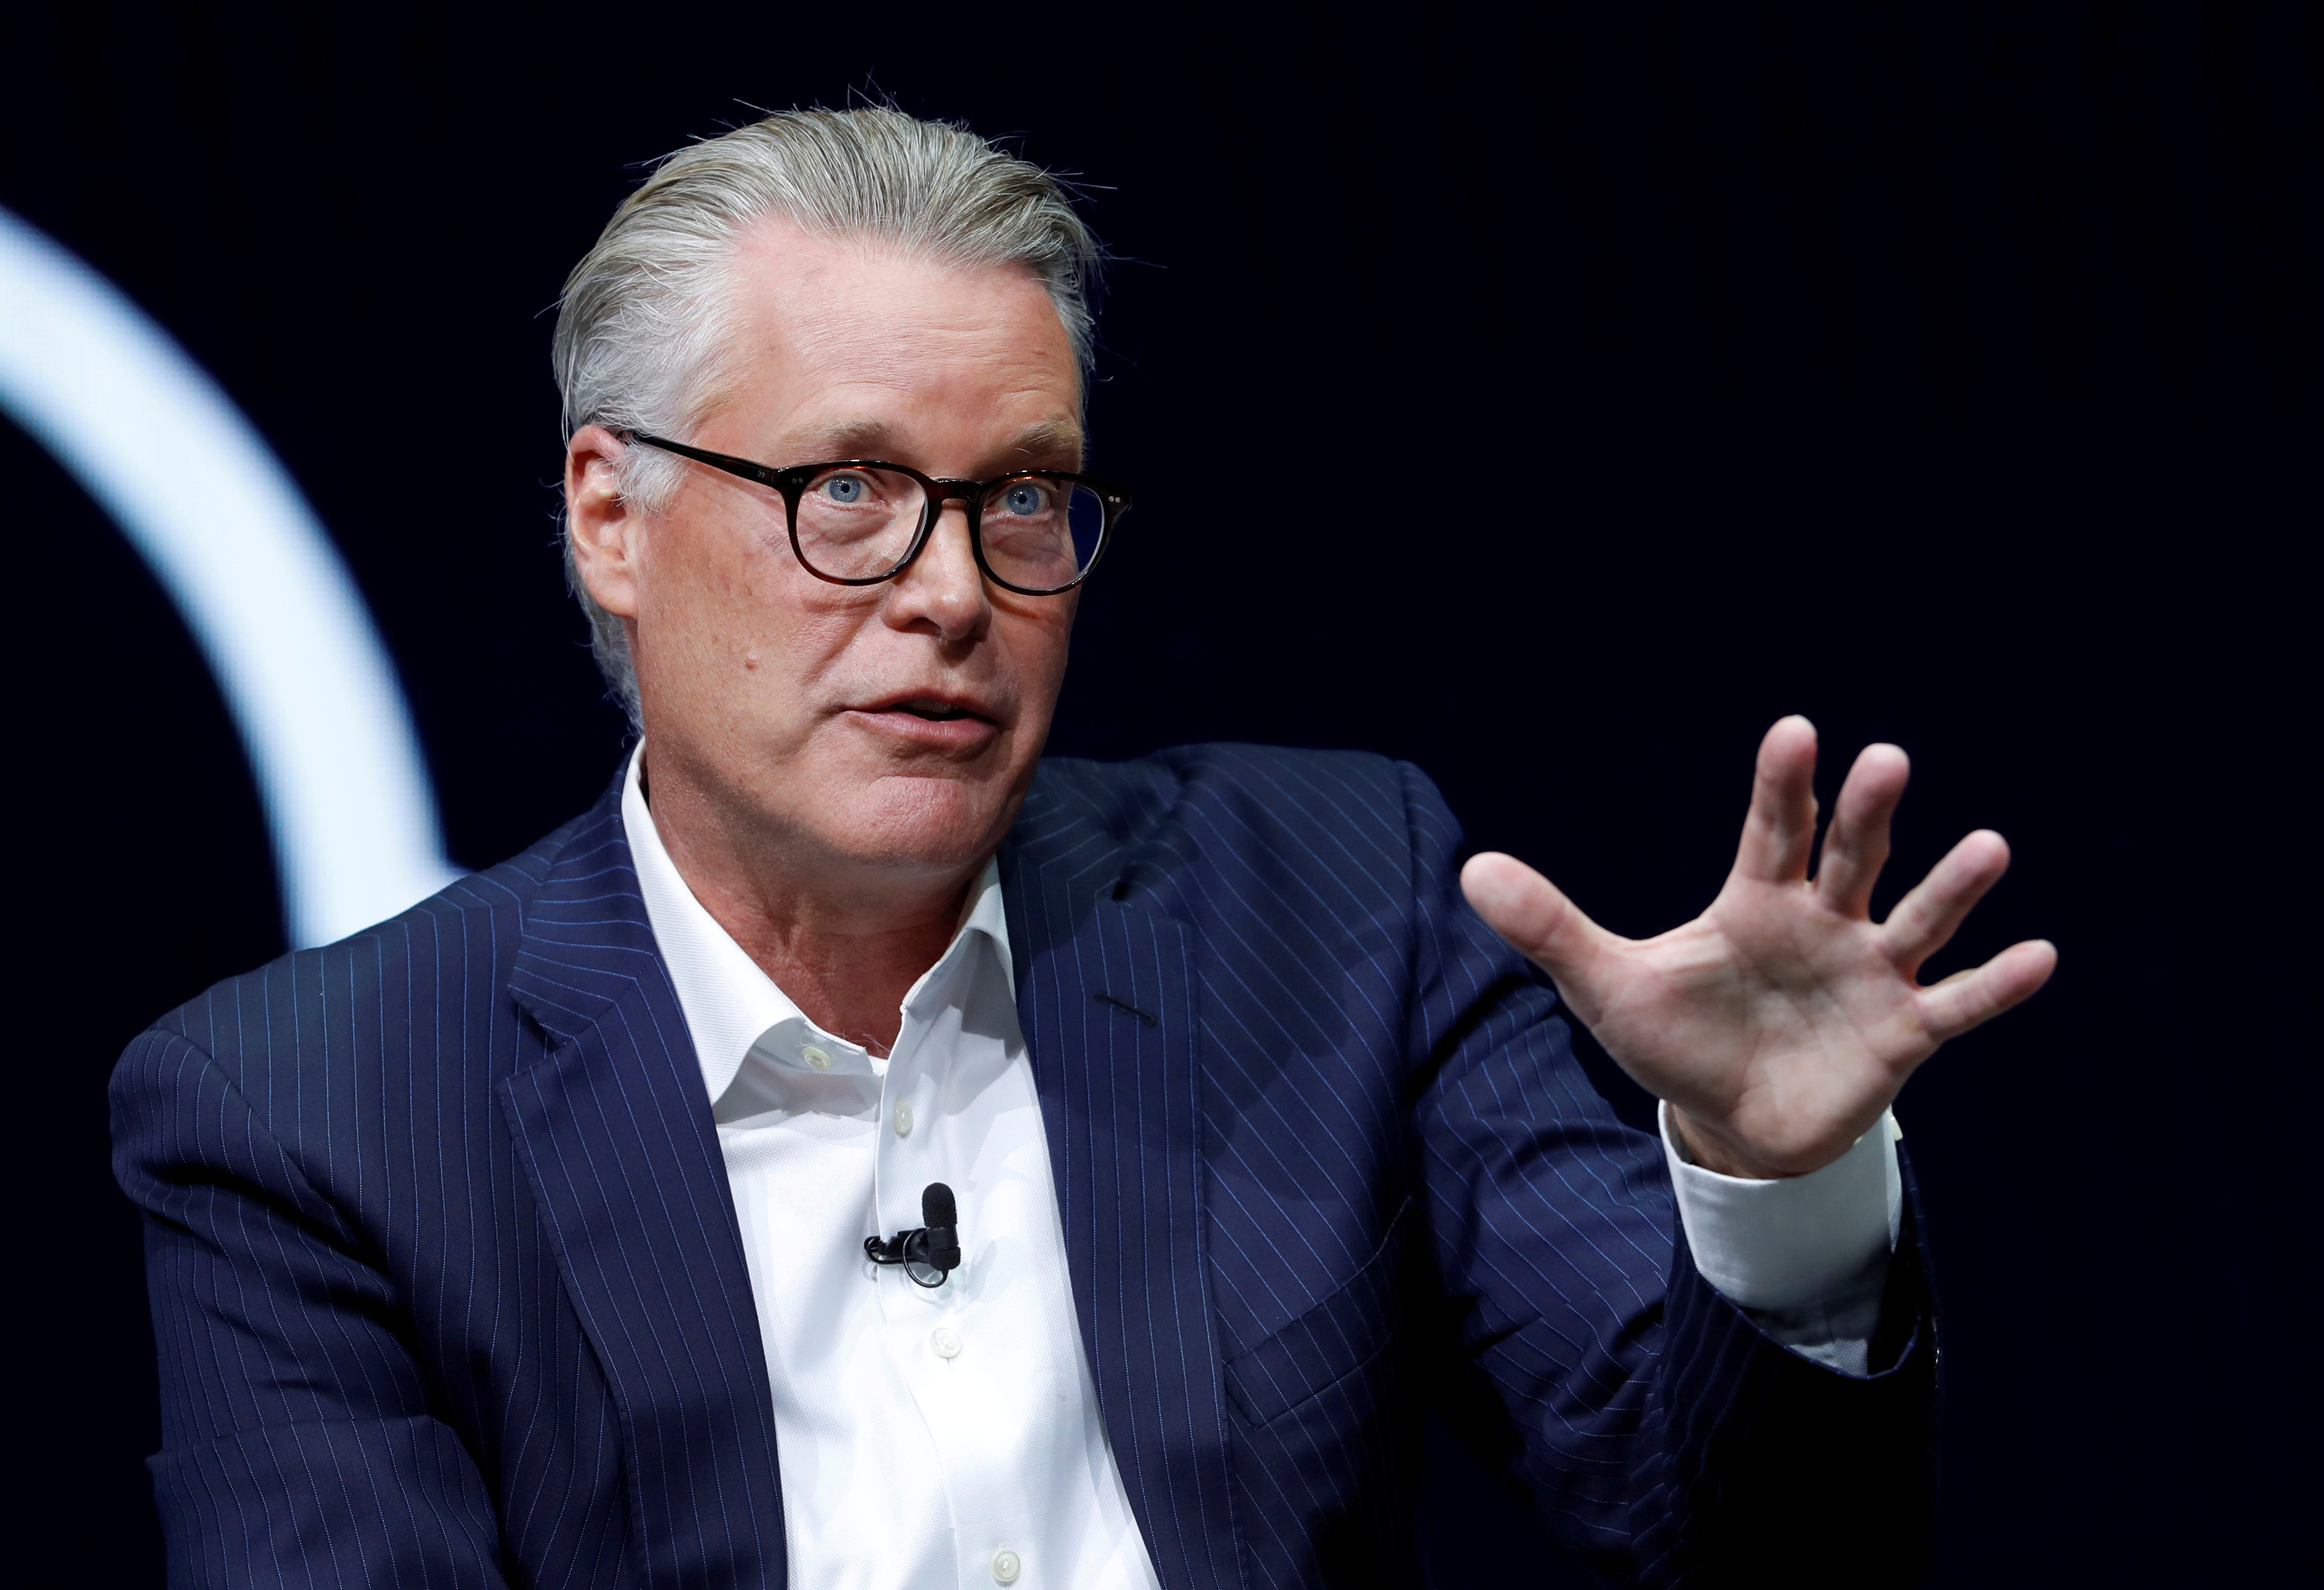 Ed Bastian, CEO of Delta Air Lines, speaks during a keynote address at the 2019 CES in Las Vegas